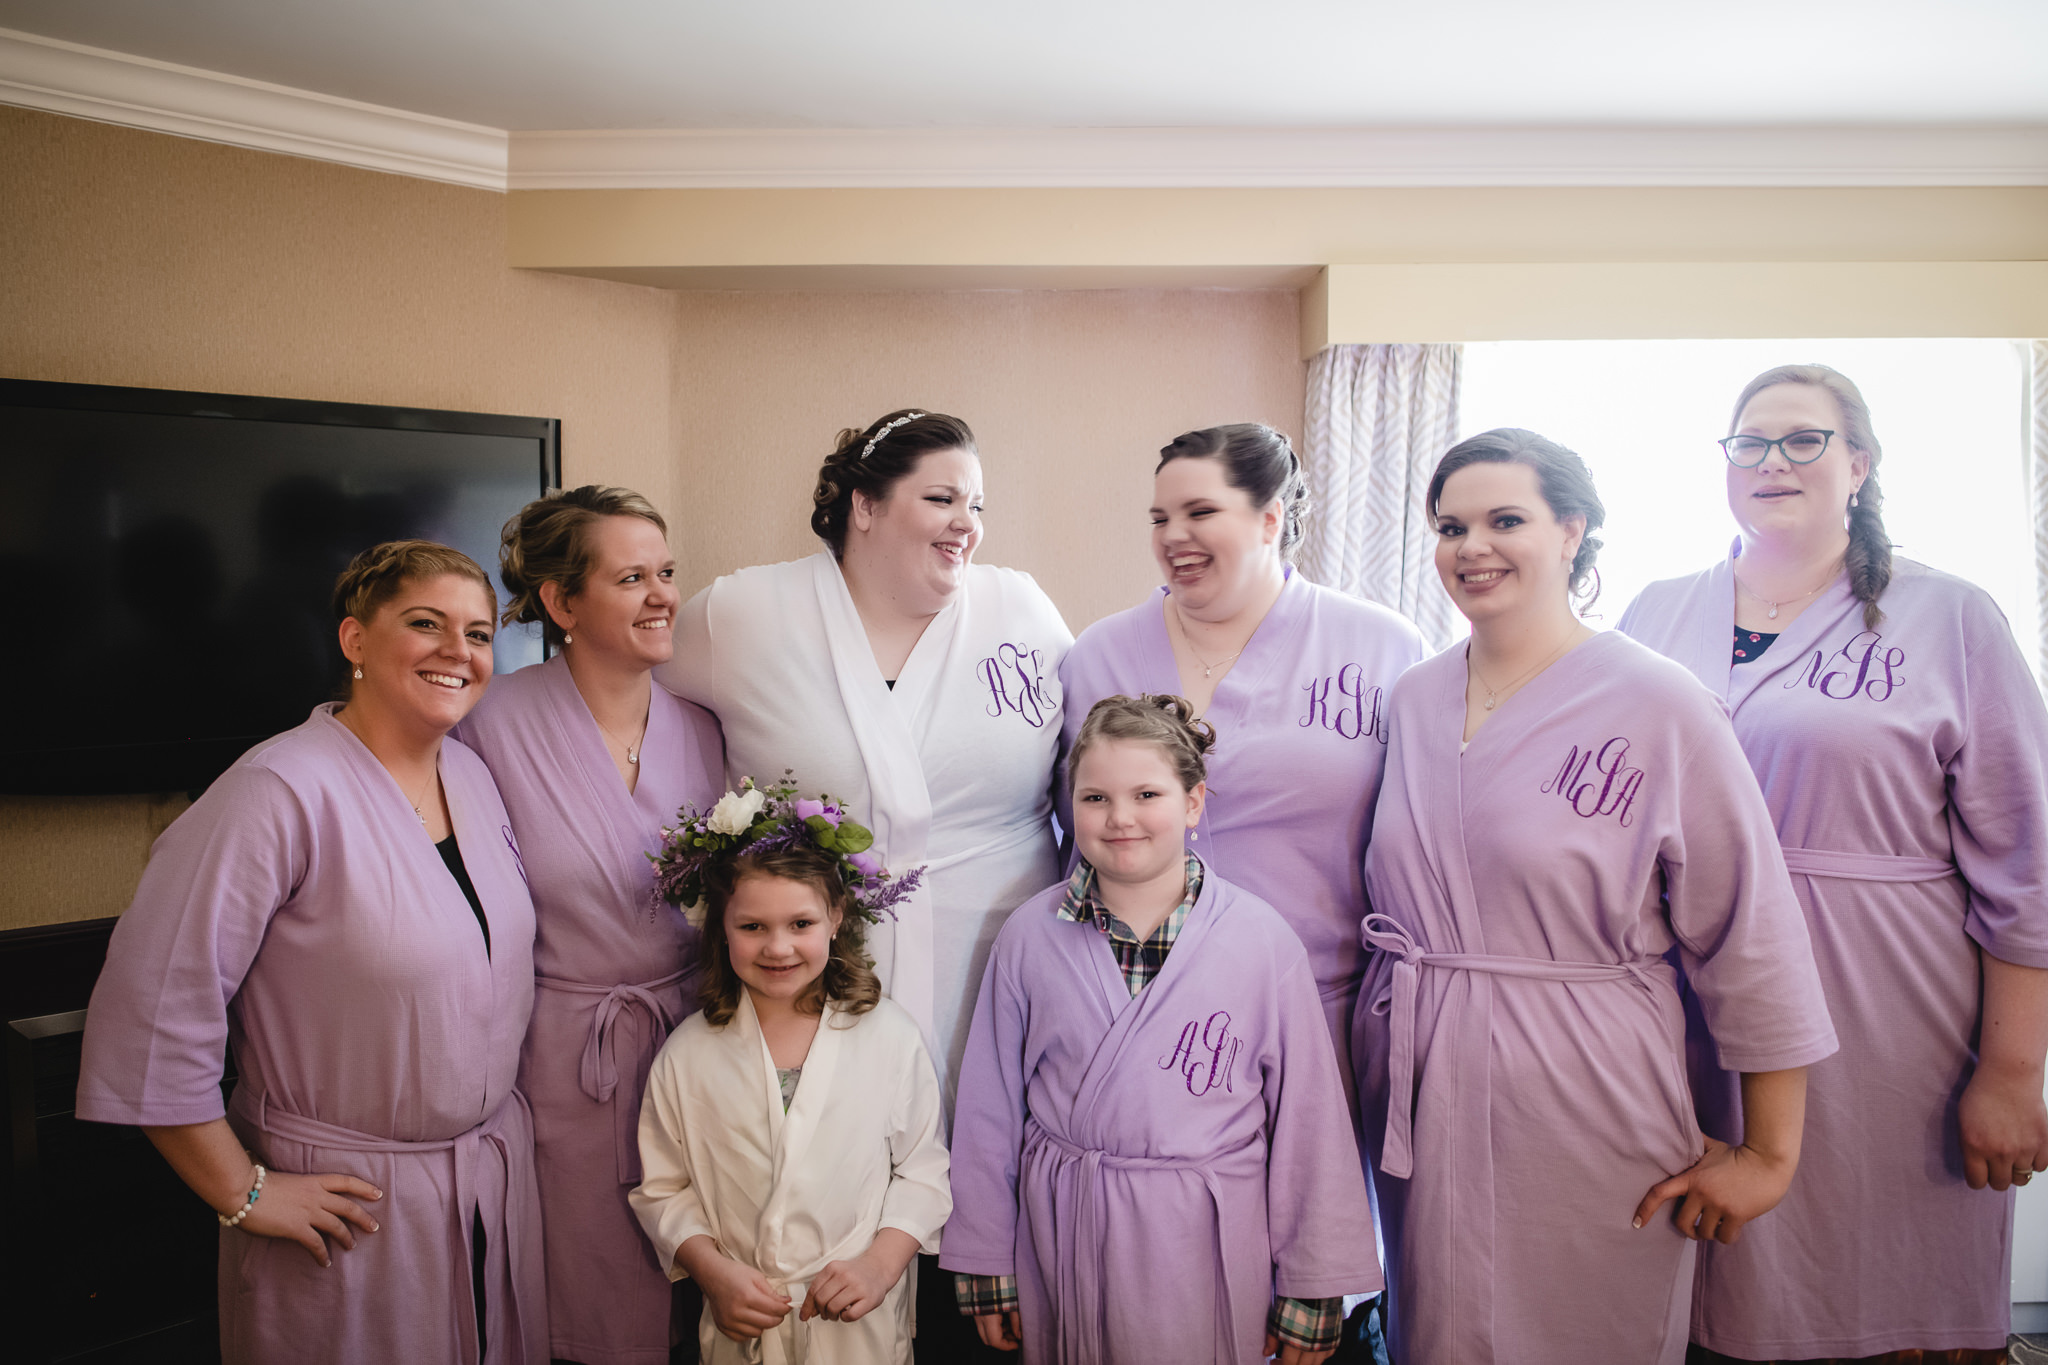 Bride laughs with her bridesmaids in their custom monogram robes